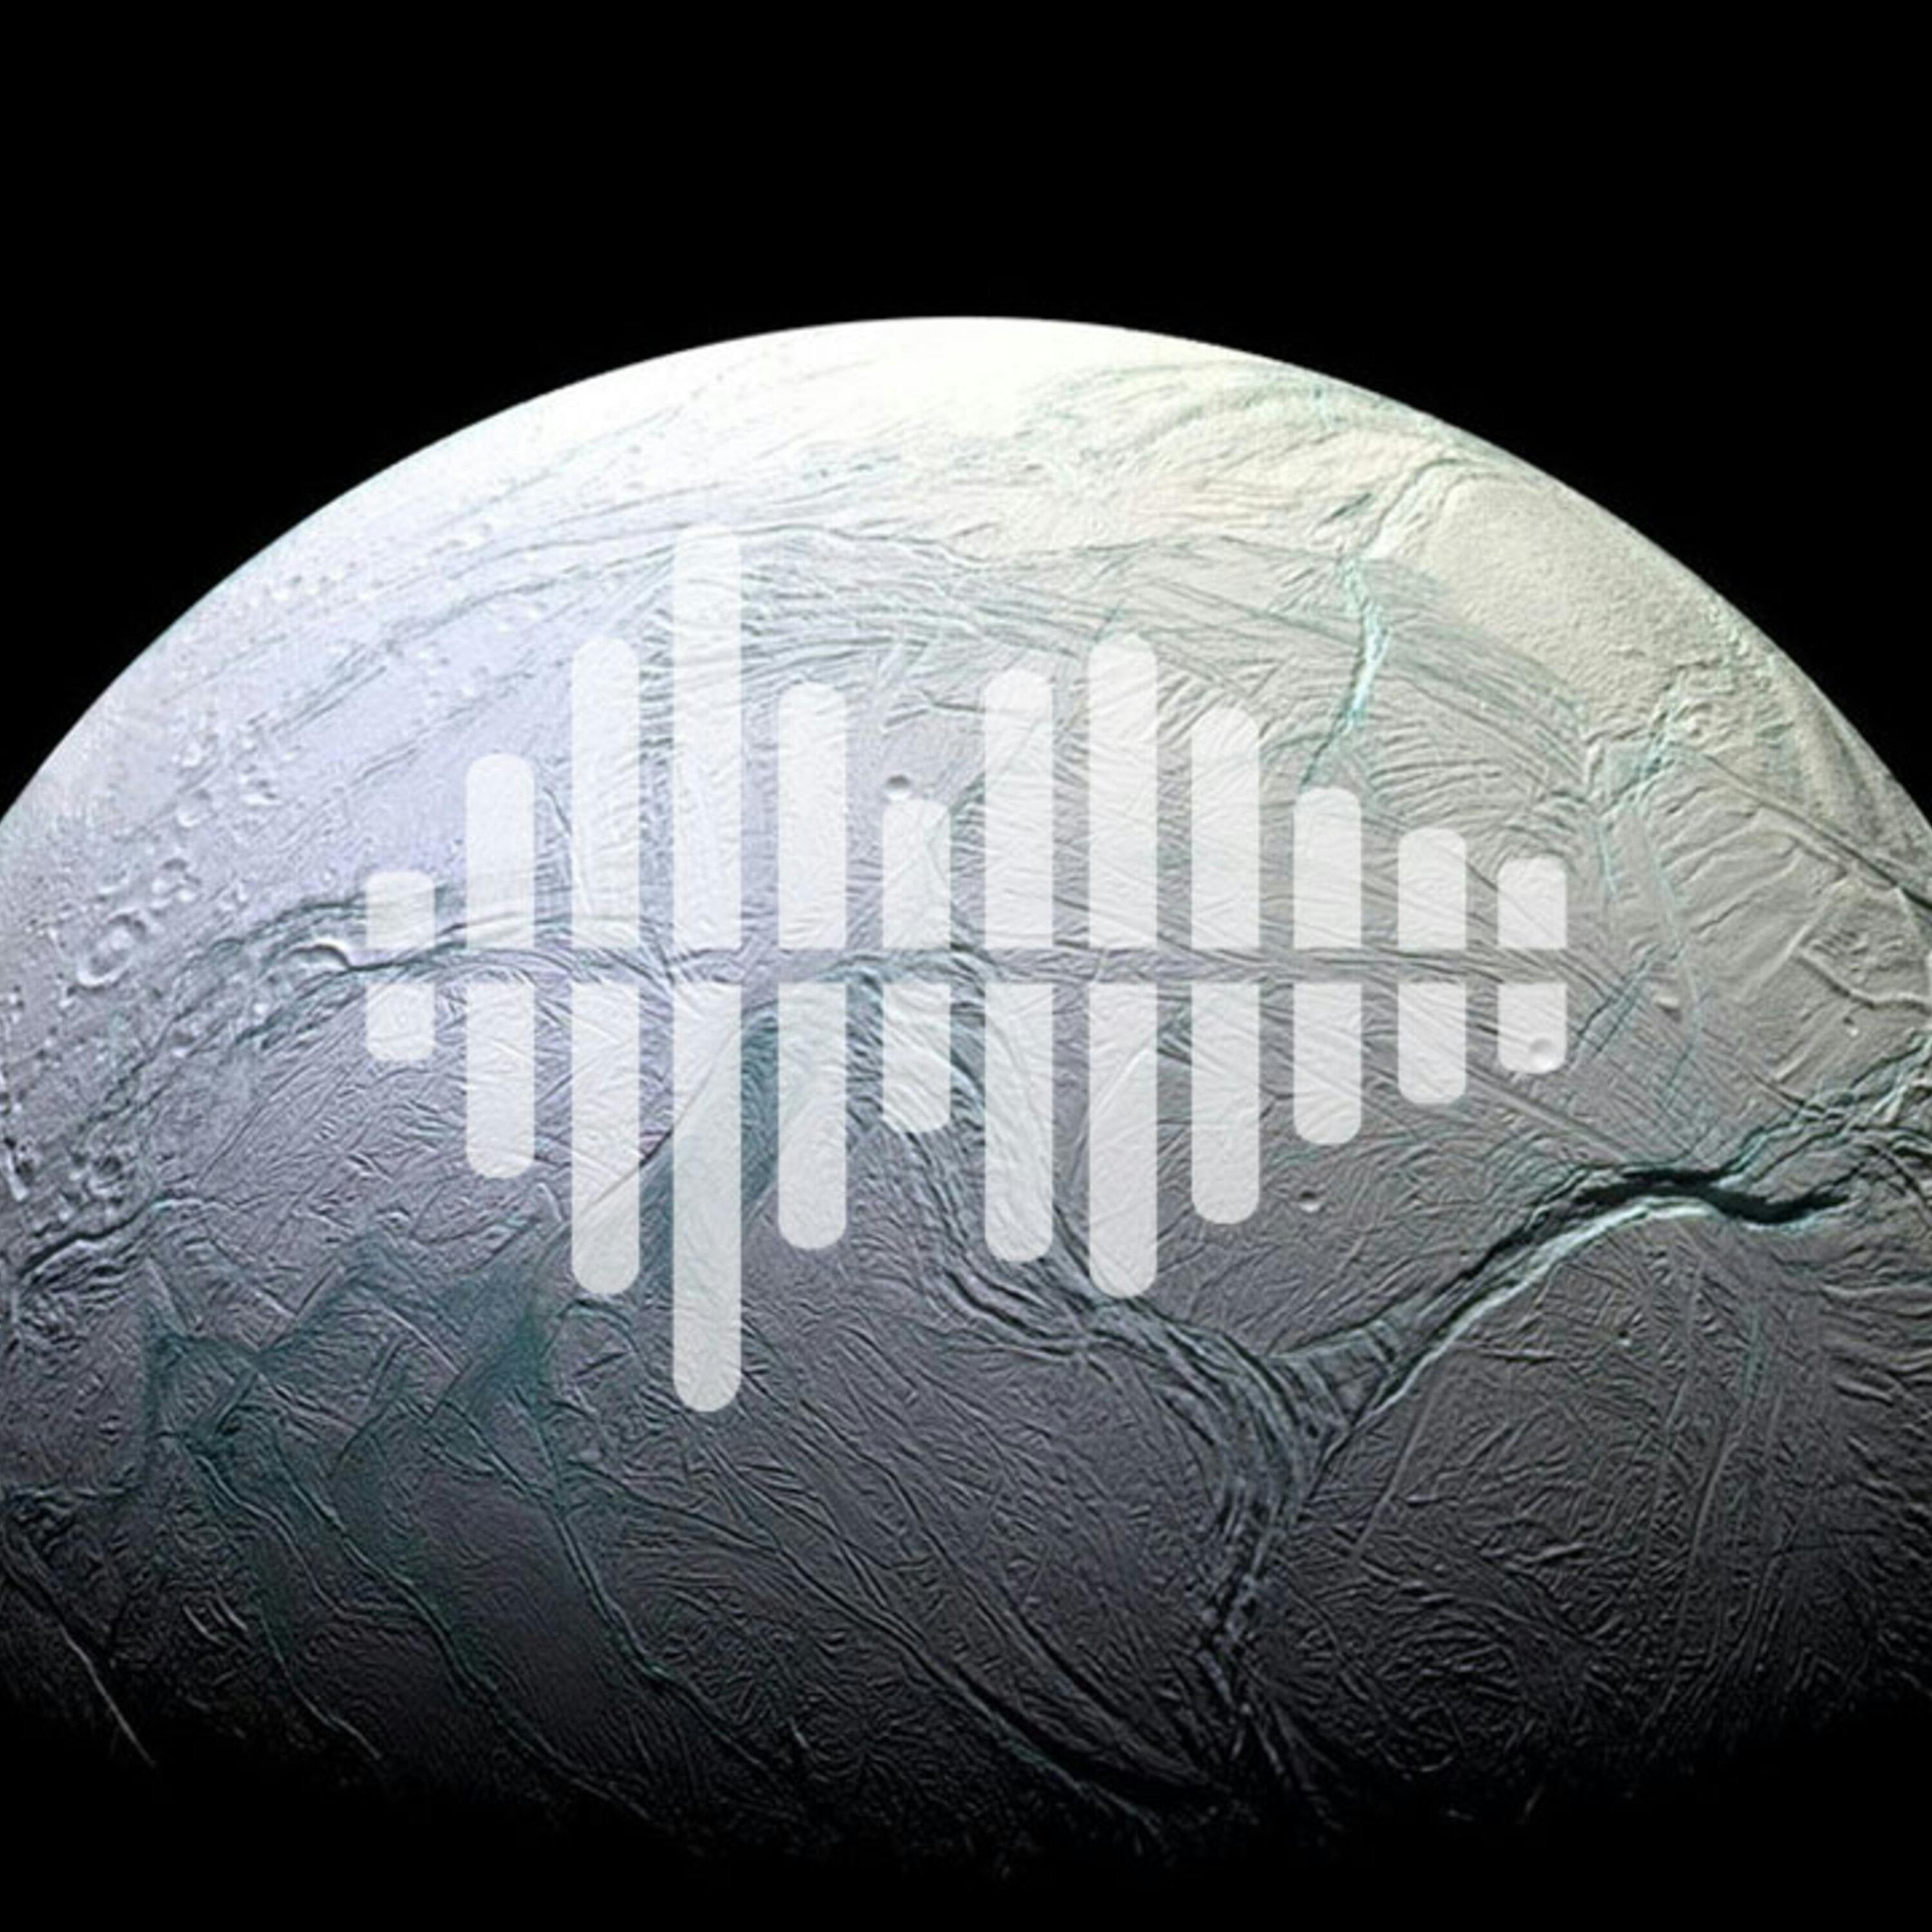 Possible fabrications in Alzheimer’s research, and bad news for life on Enceladus